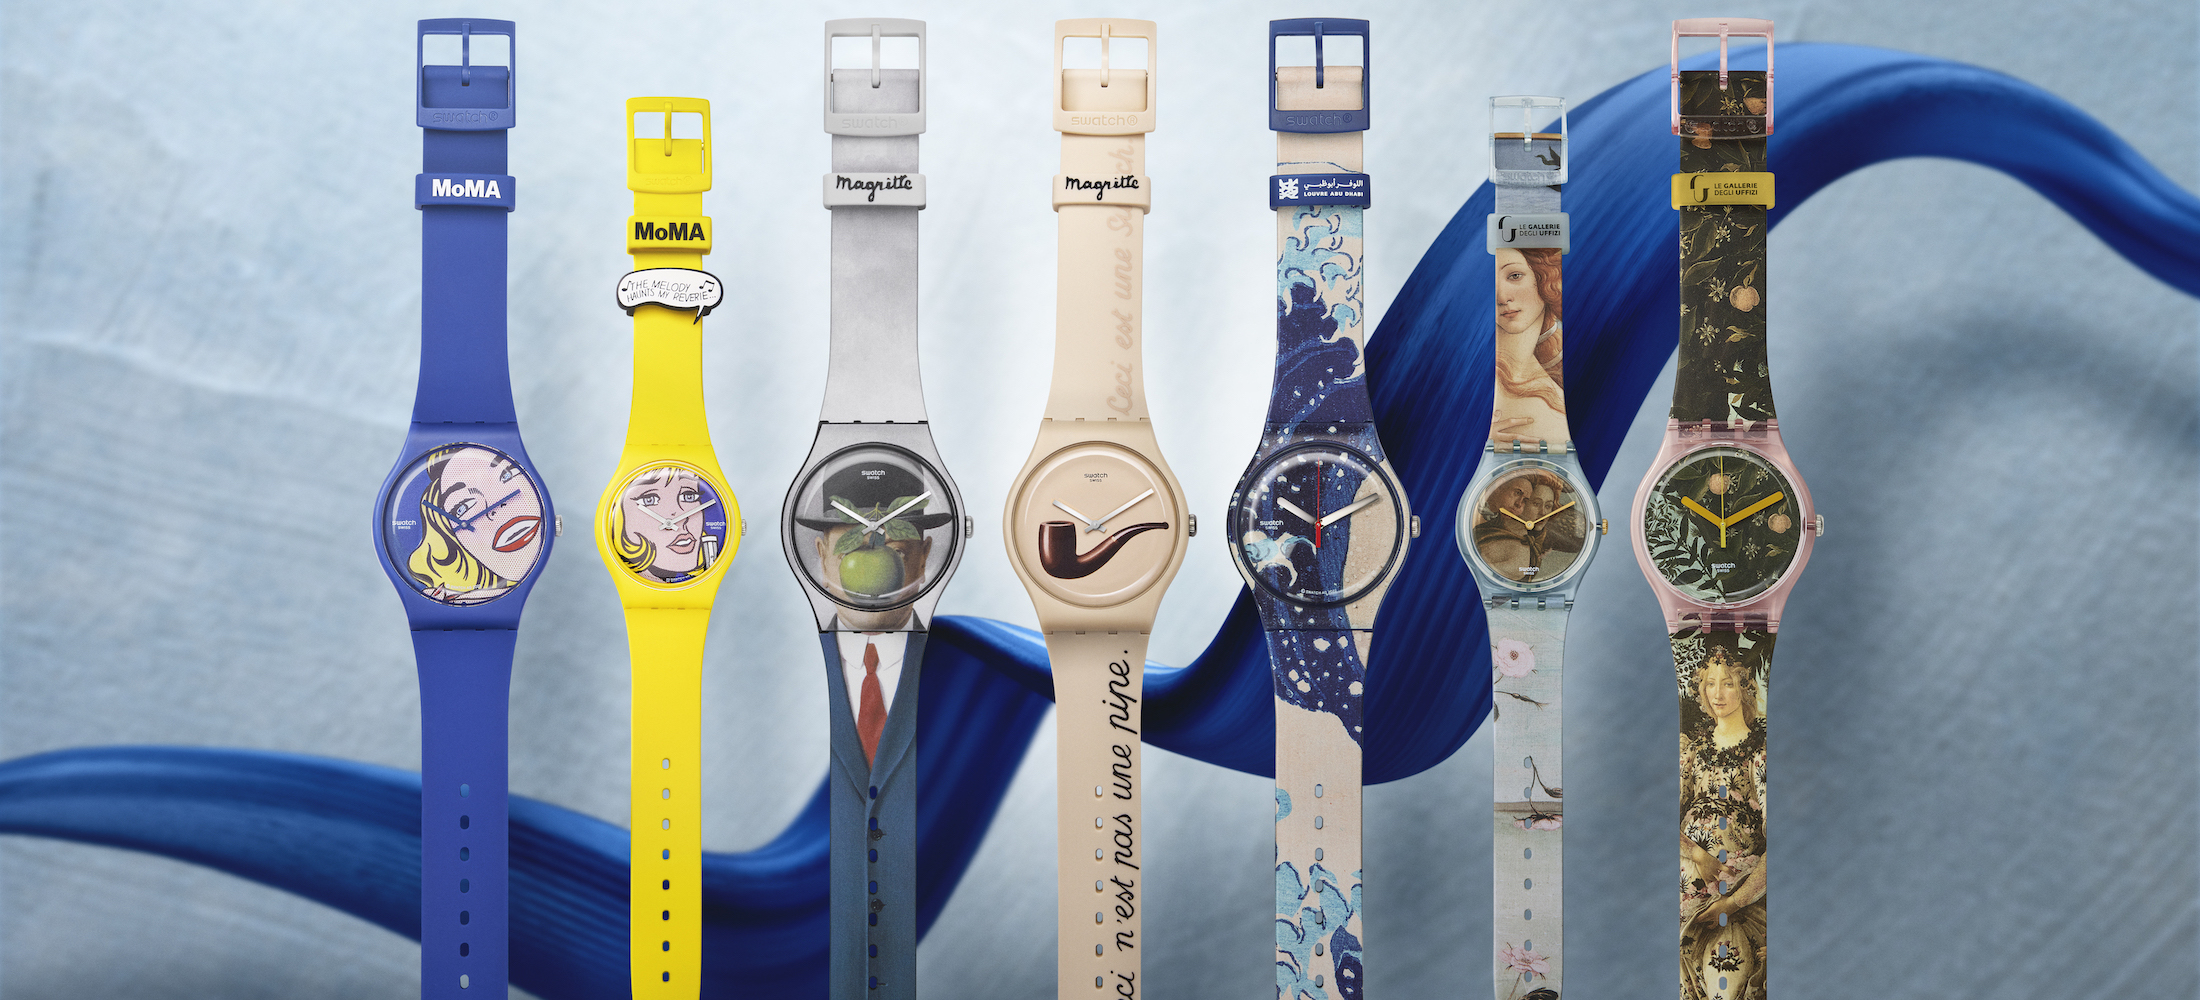 Hermès Showcases Miniature Painting on Limited Edition Watches | SJX Watches